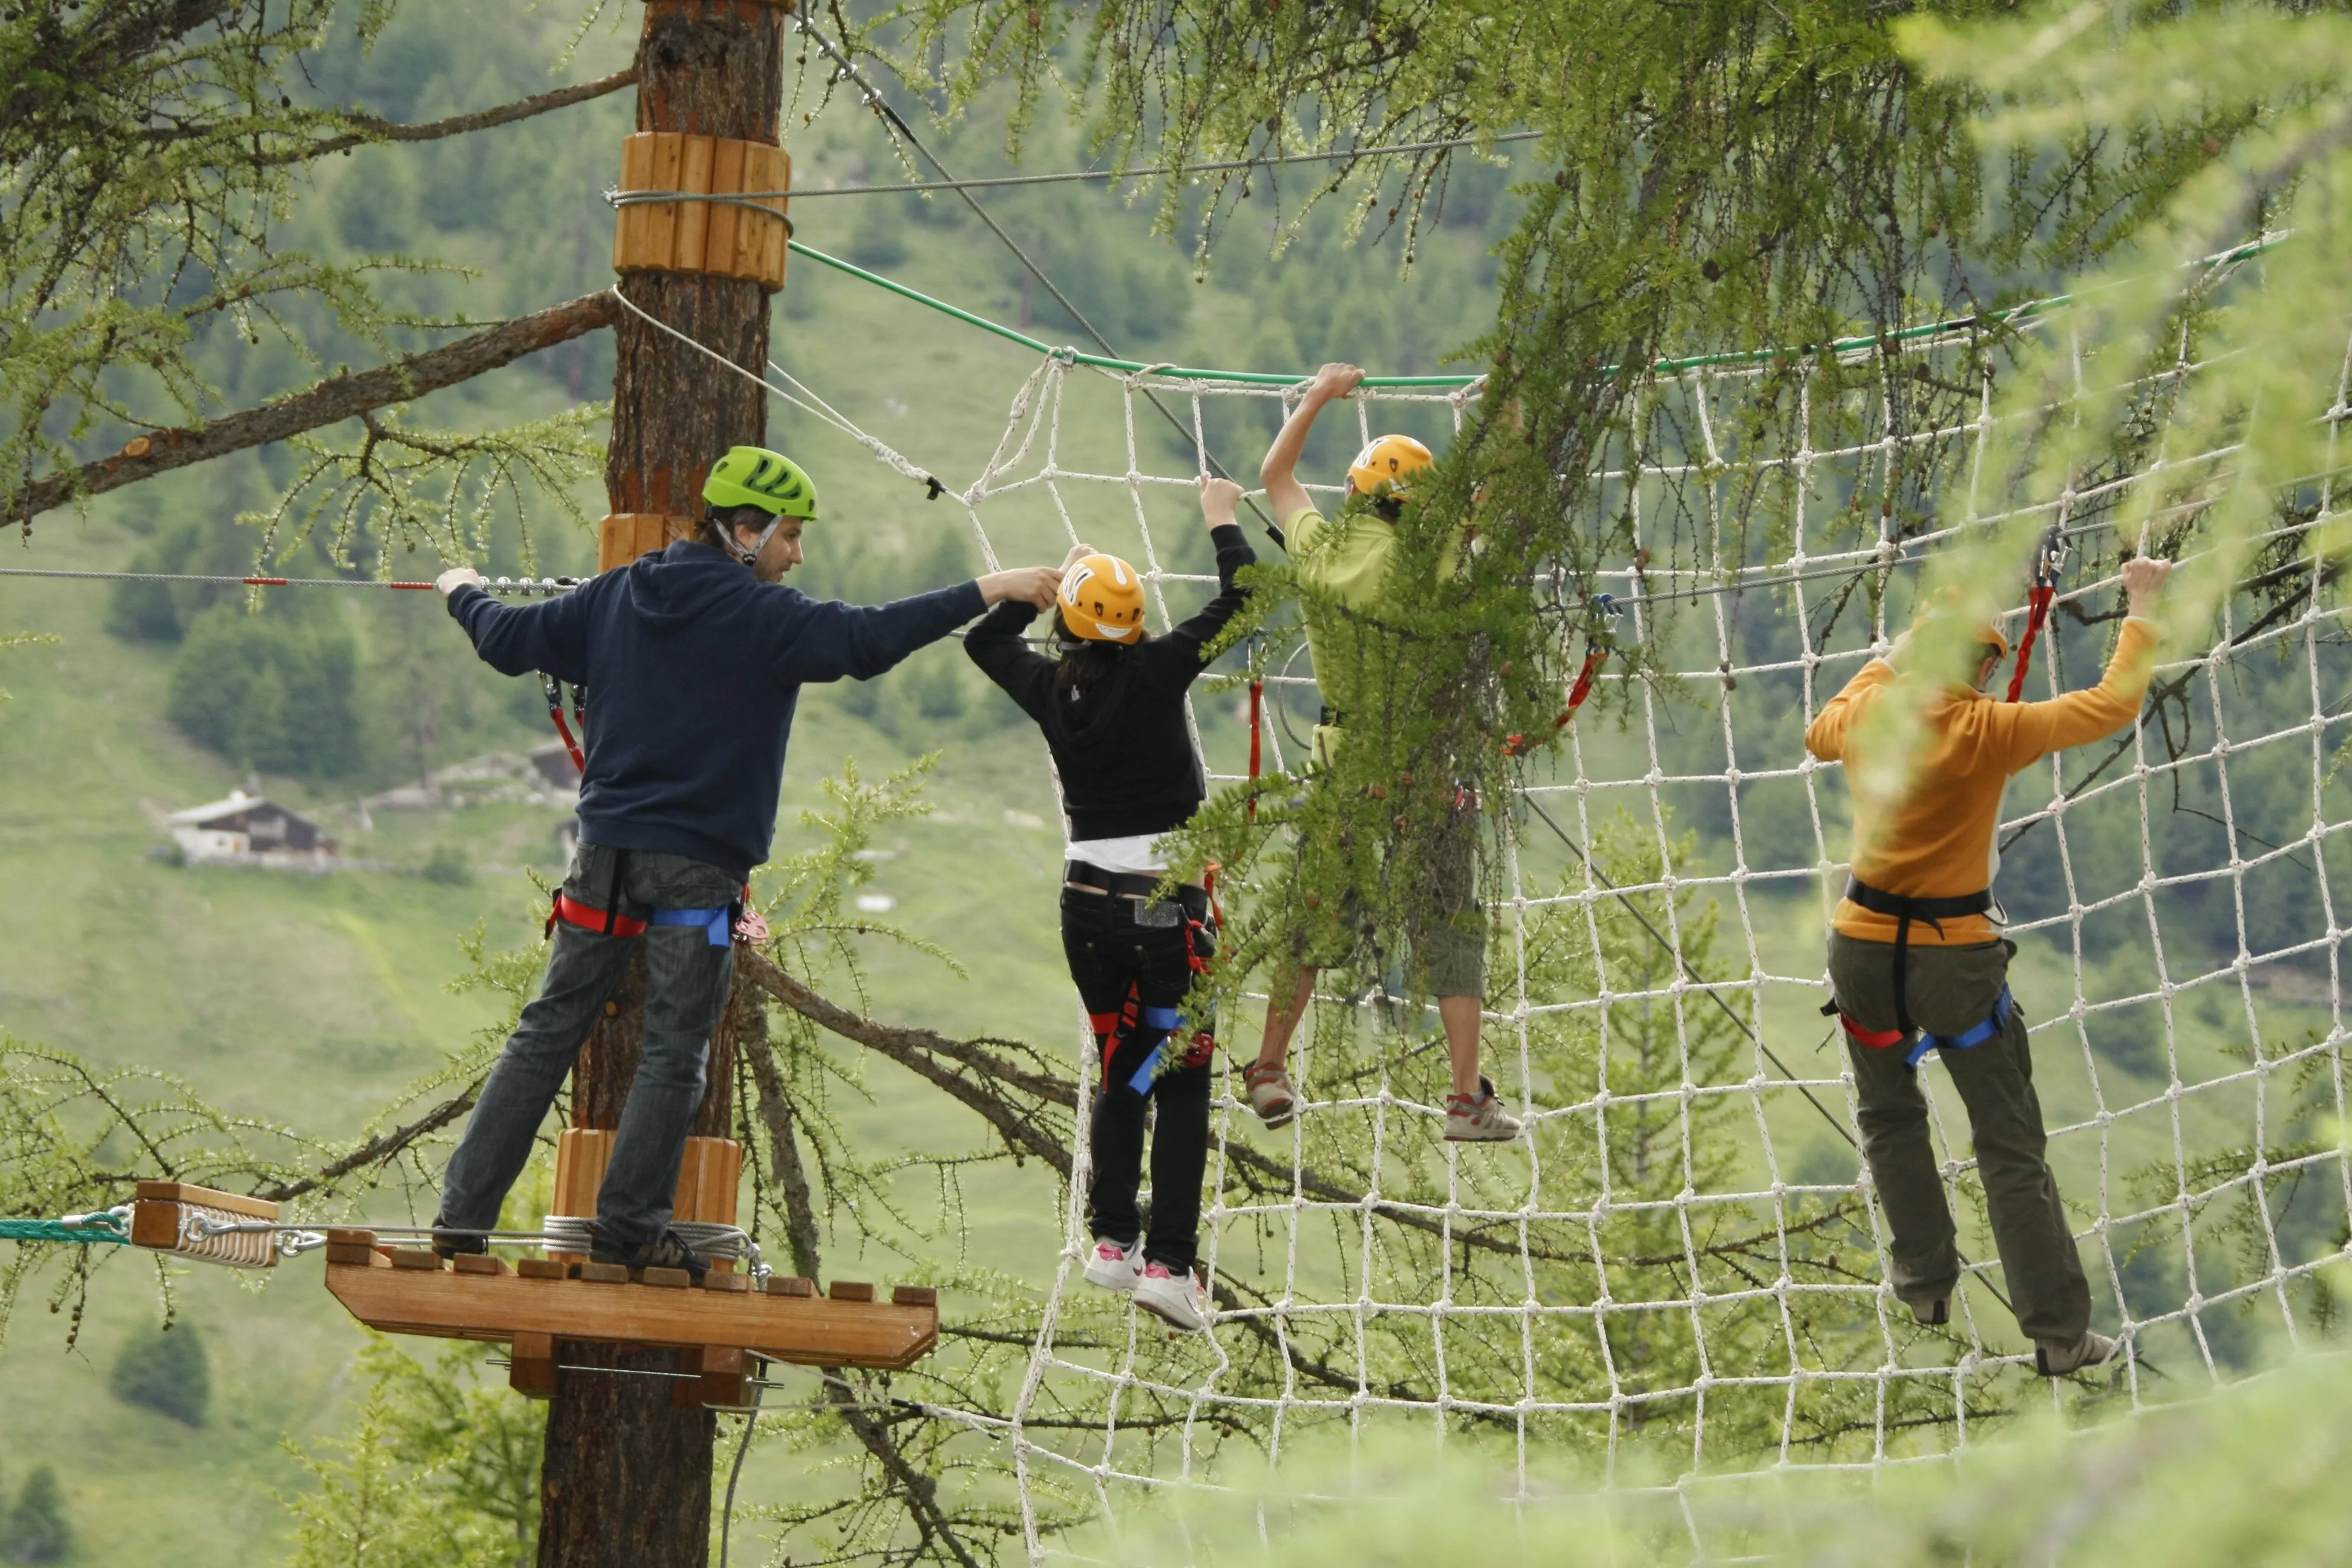 Larix Park in Italy, Europe | Adventure Parks - Rated 3.7